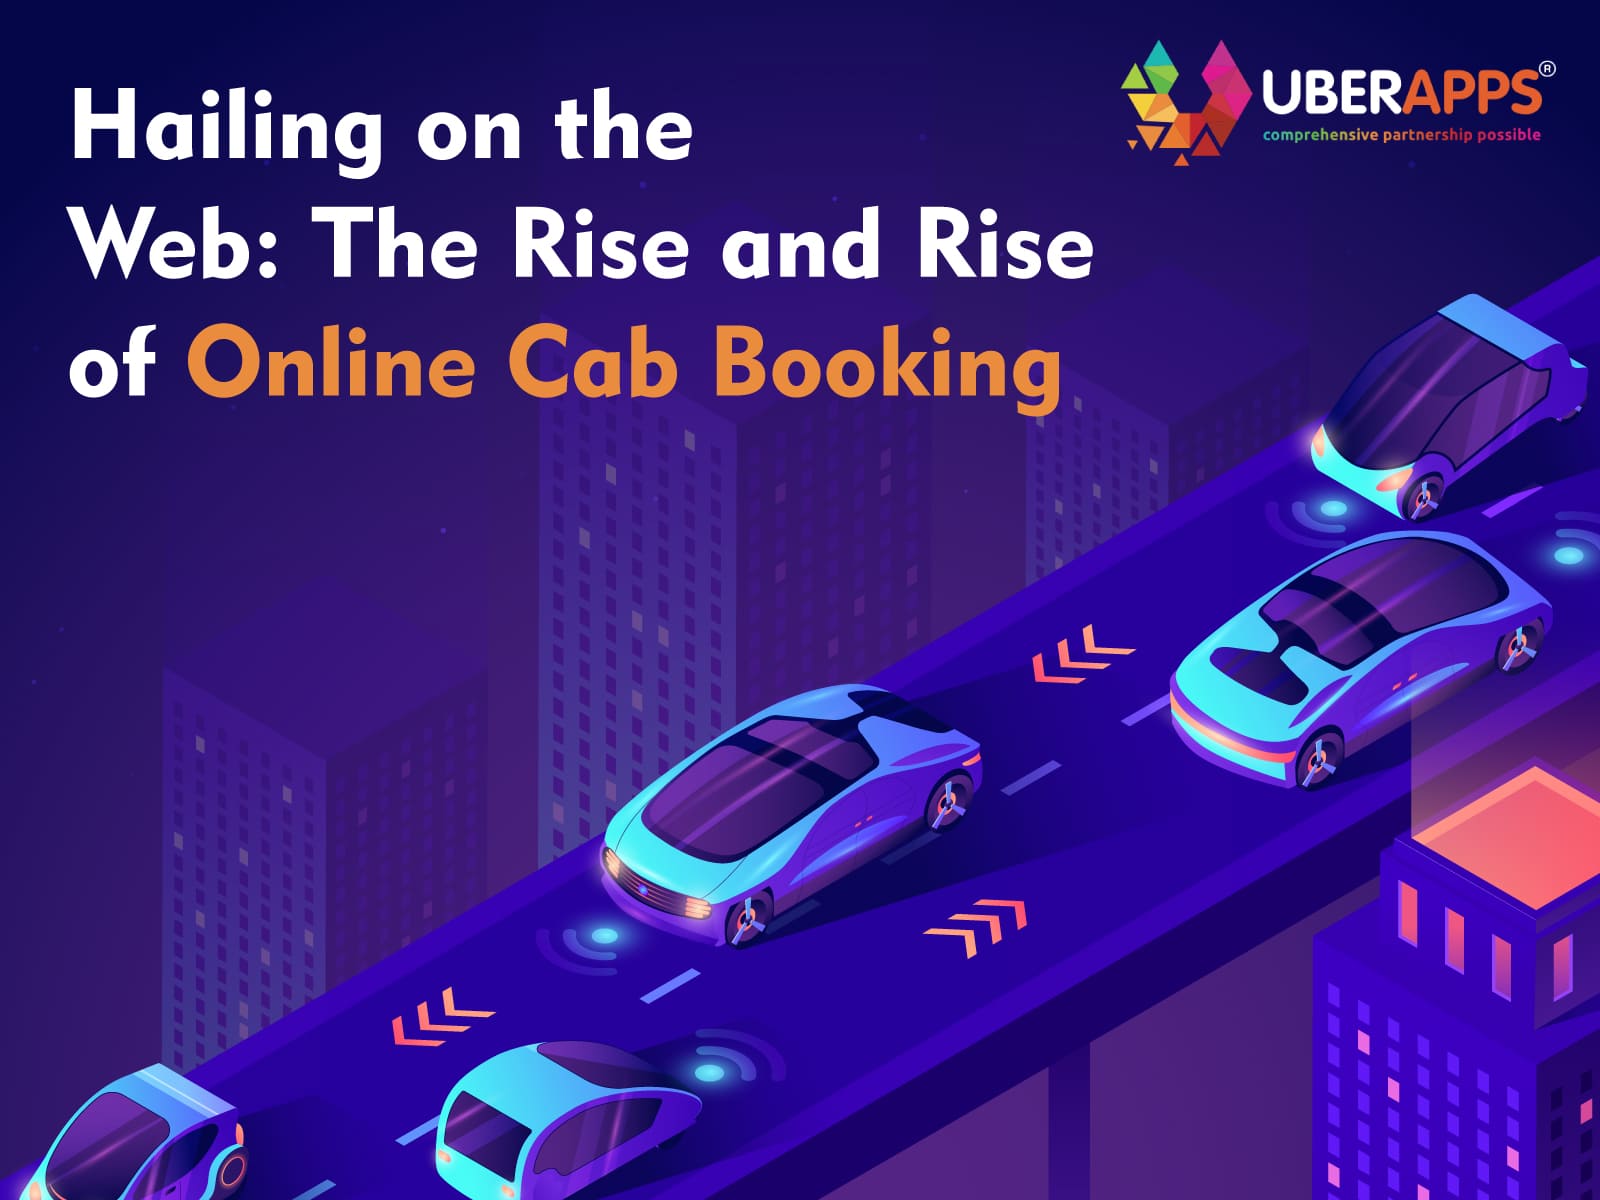 Hailing on the Web: The Rise and Rise of Online Cab Booking